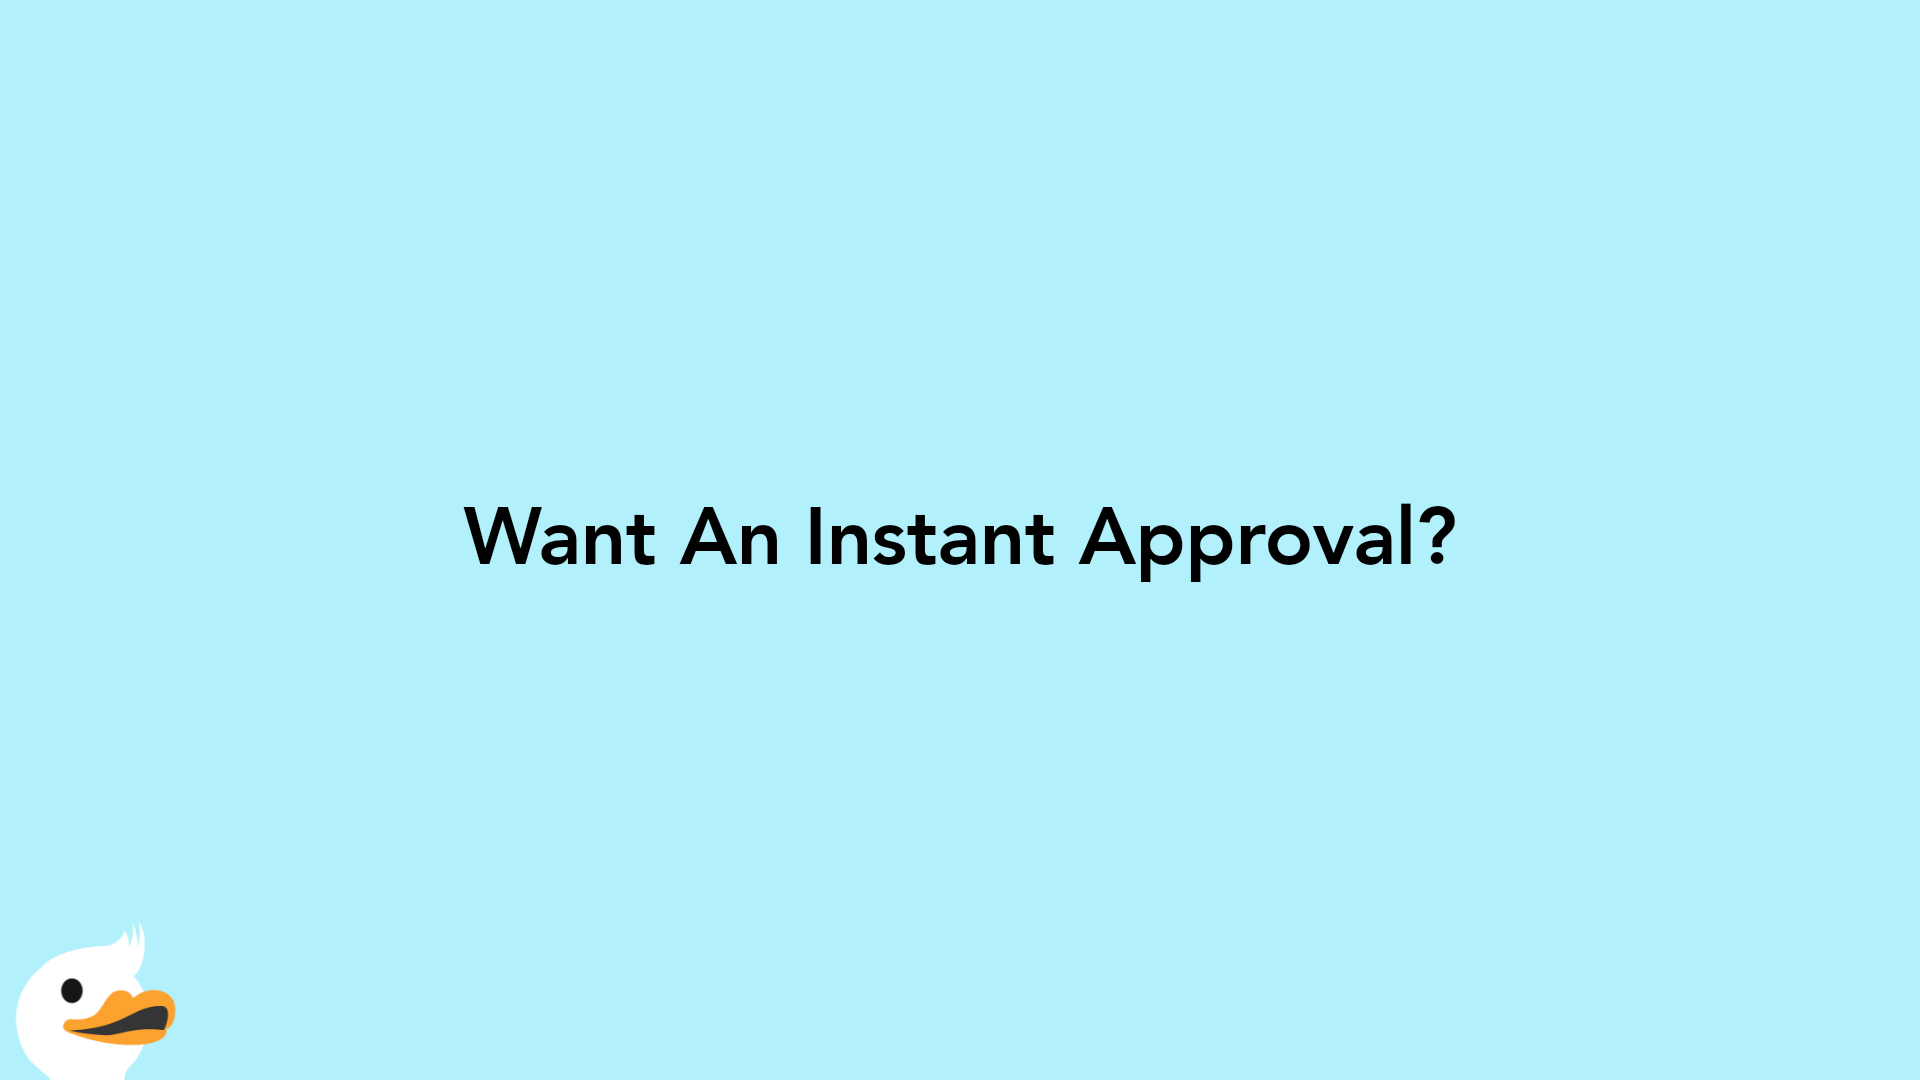 Want An Instant Approval?